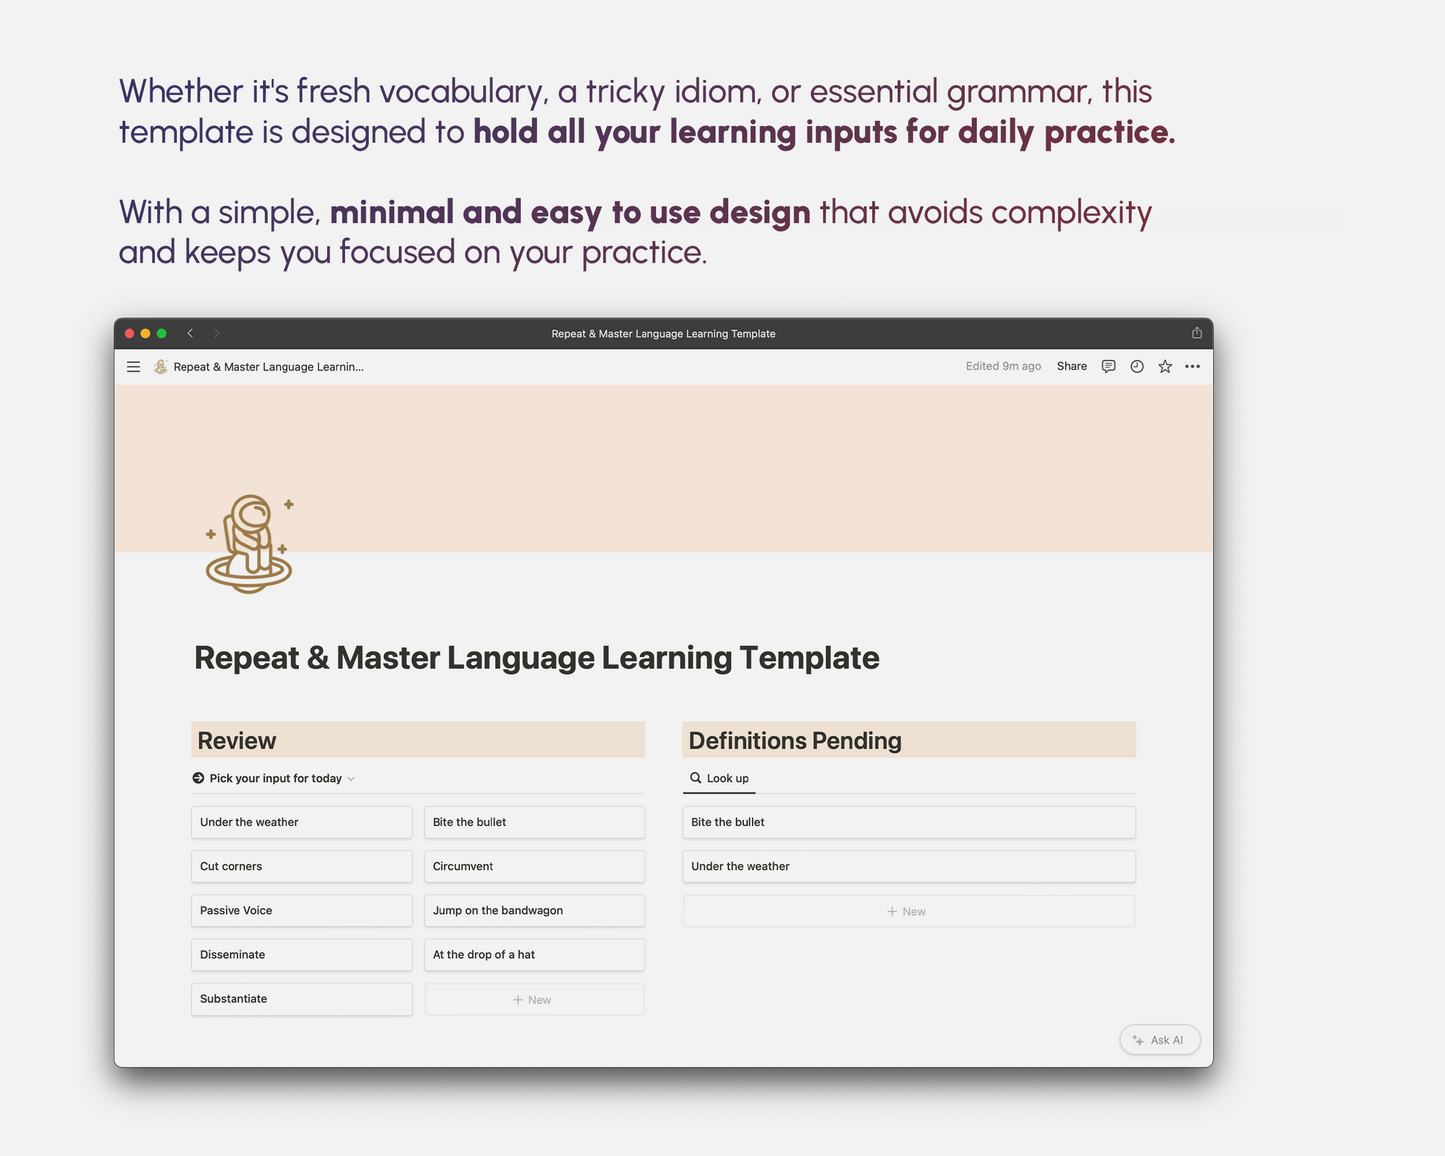 Preview of a Notion template for language learning, emphasizing the template's simplicity and ease of use for managing daily practice in grammar and vocabulary.